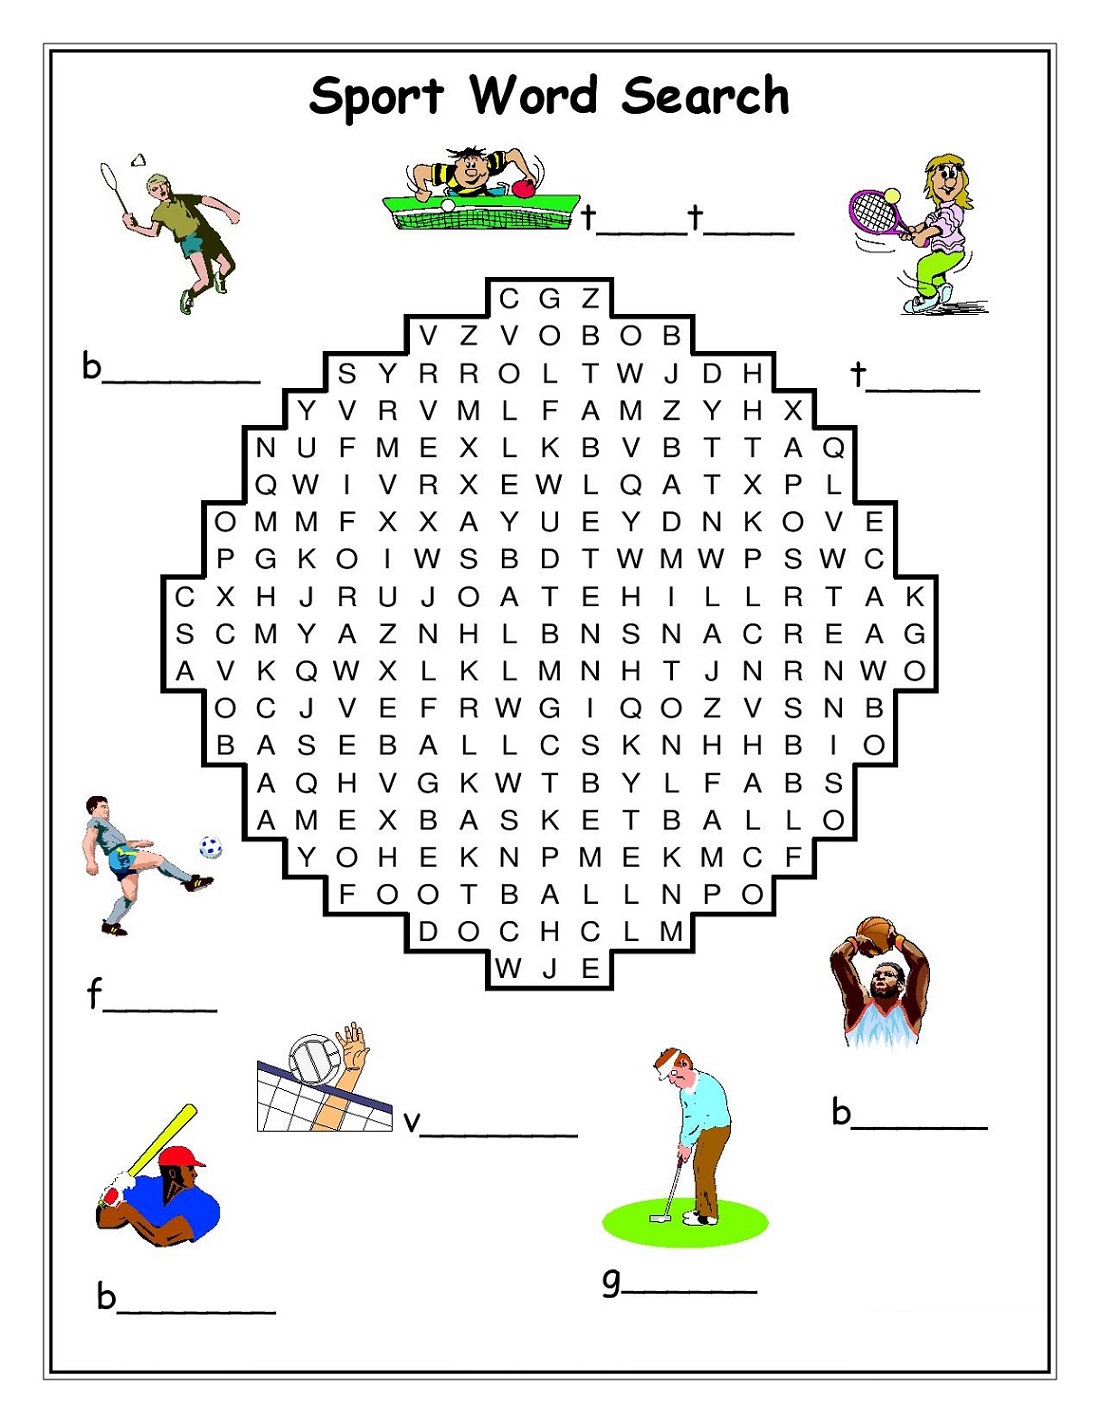 Sport Word Searches to Print